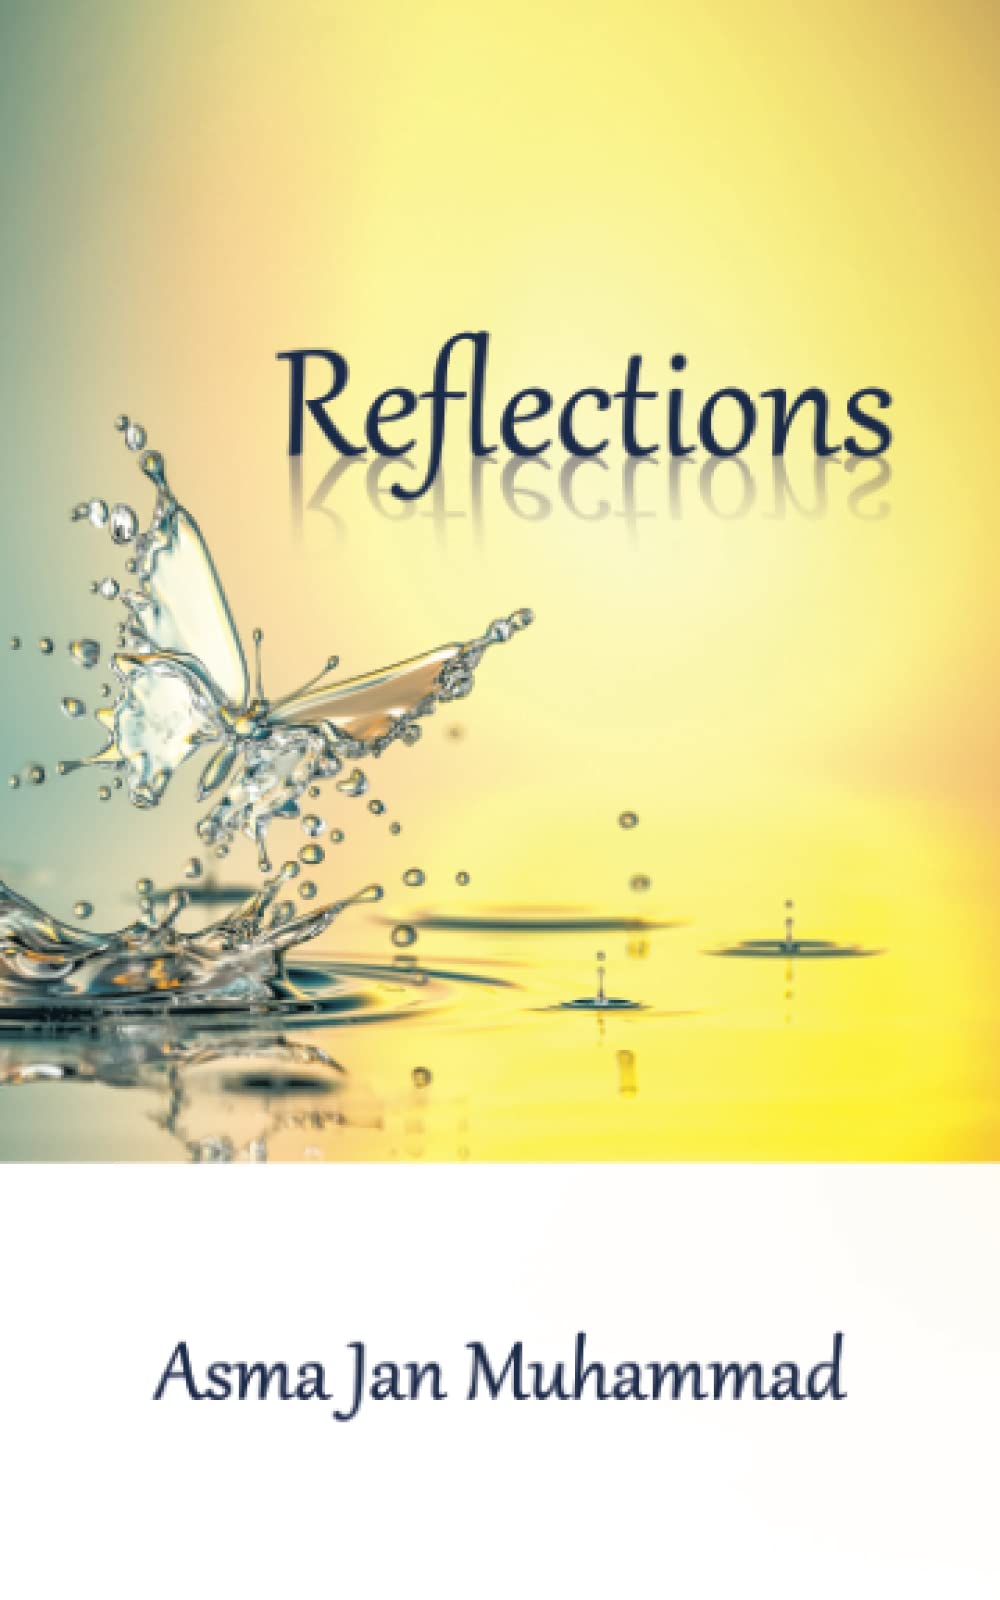 See The World From A Different Perspective With Asma Jan Muhammad’s Latest Release, Reflections